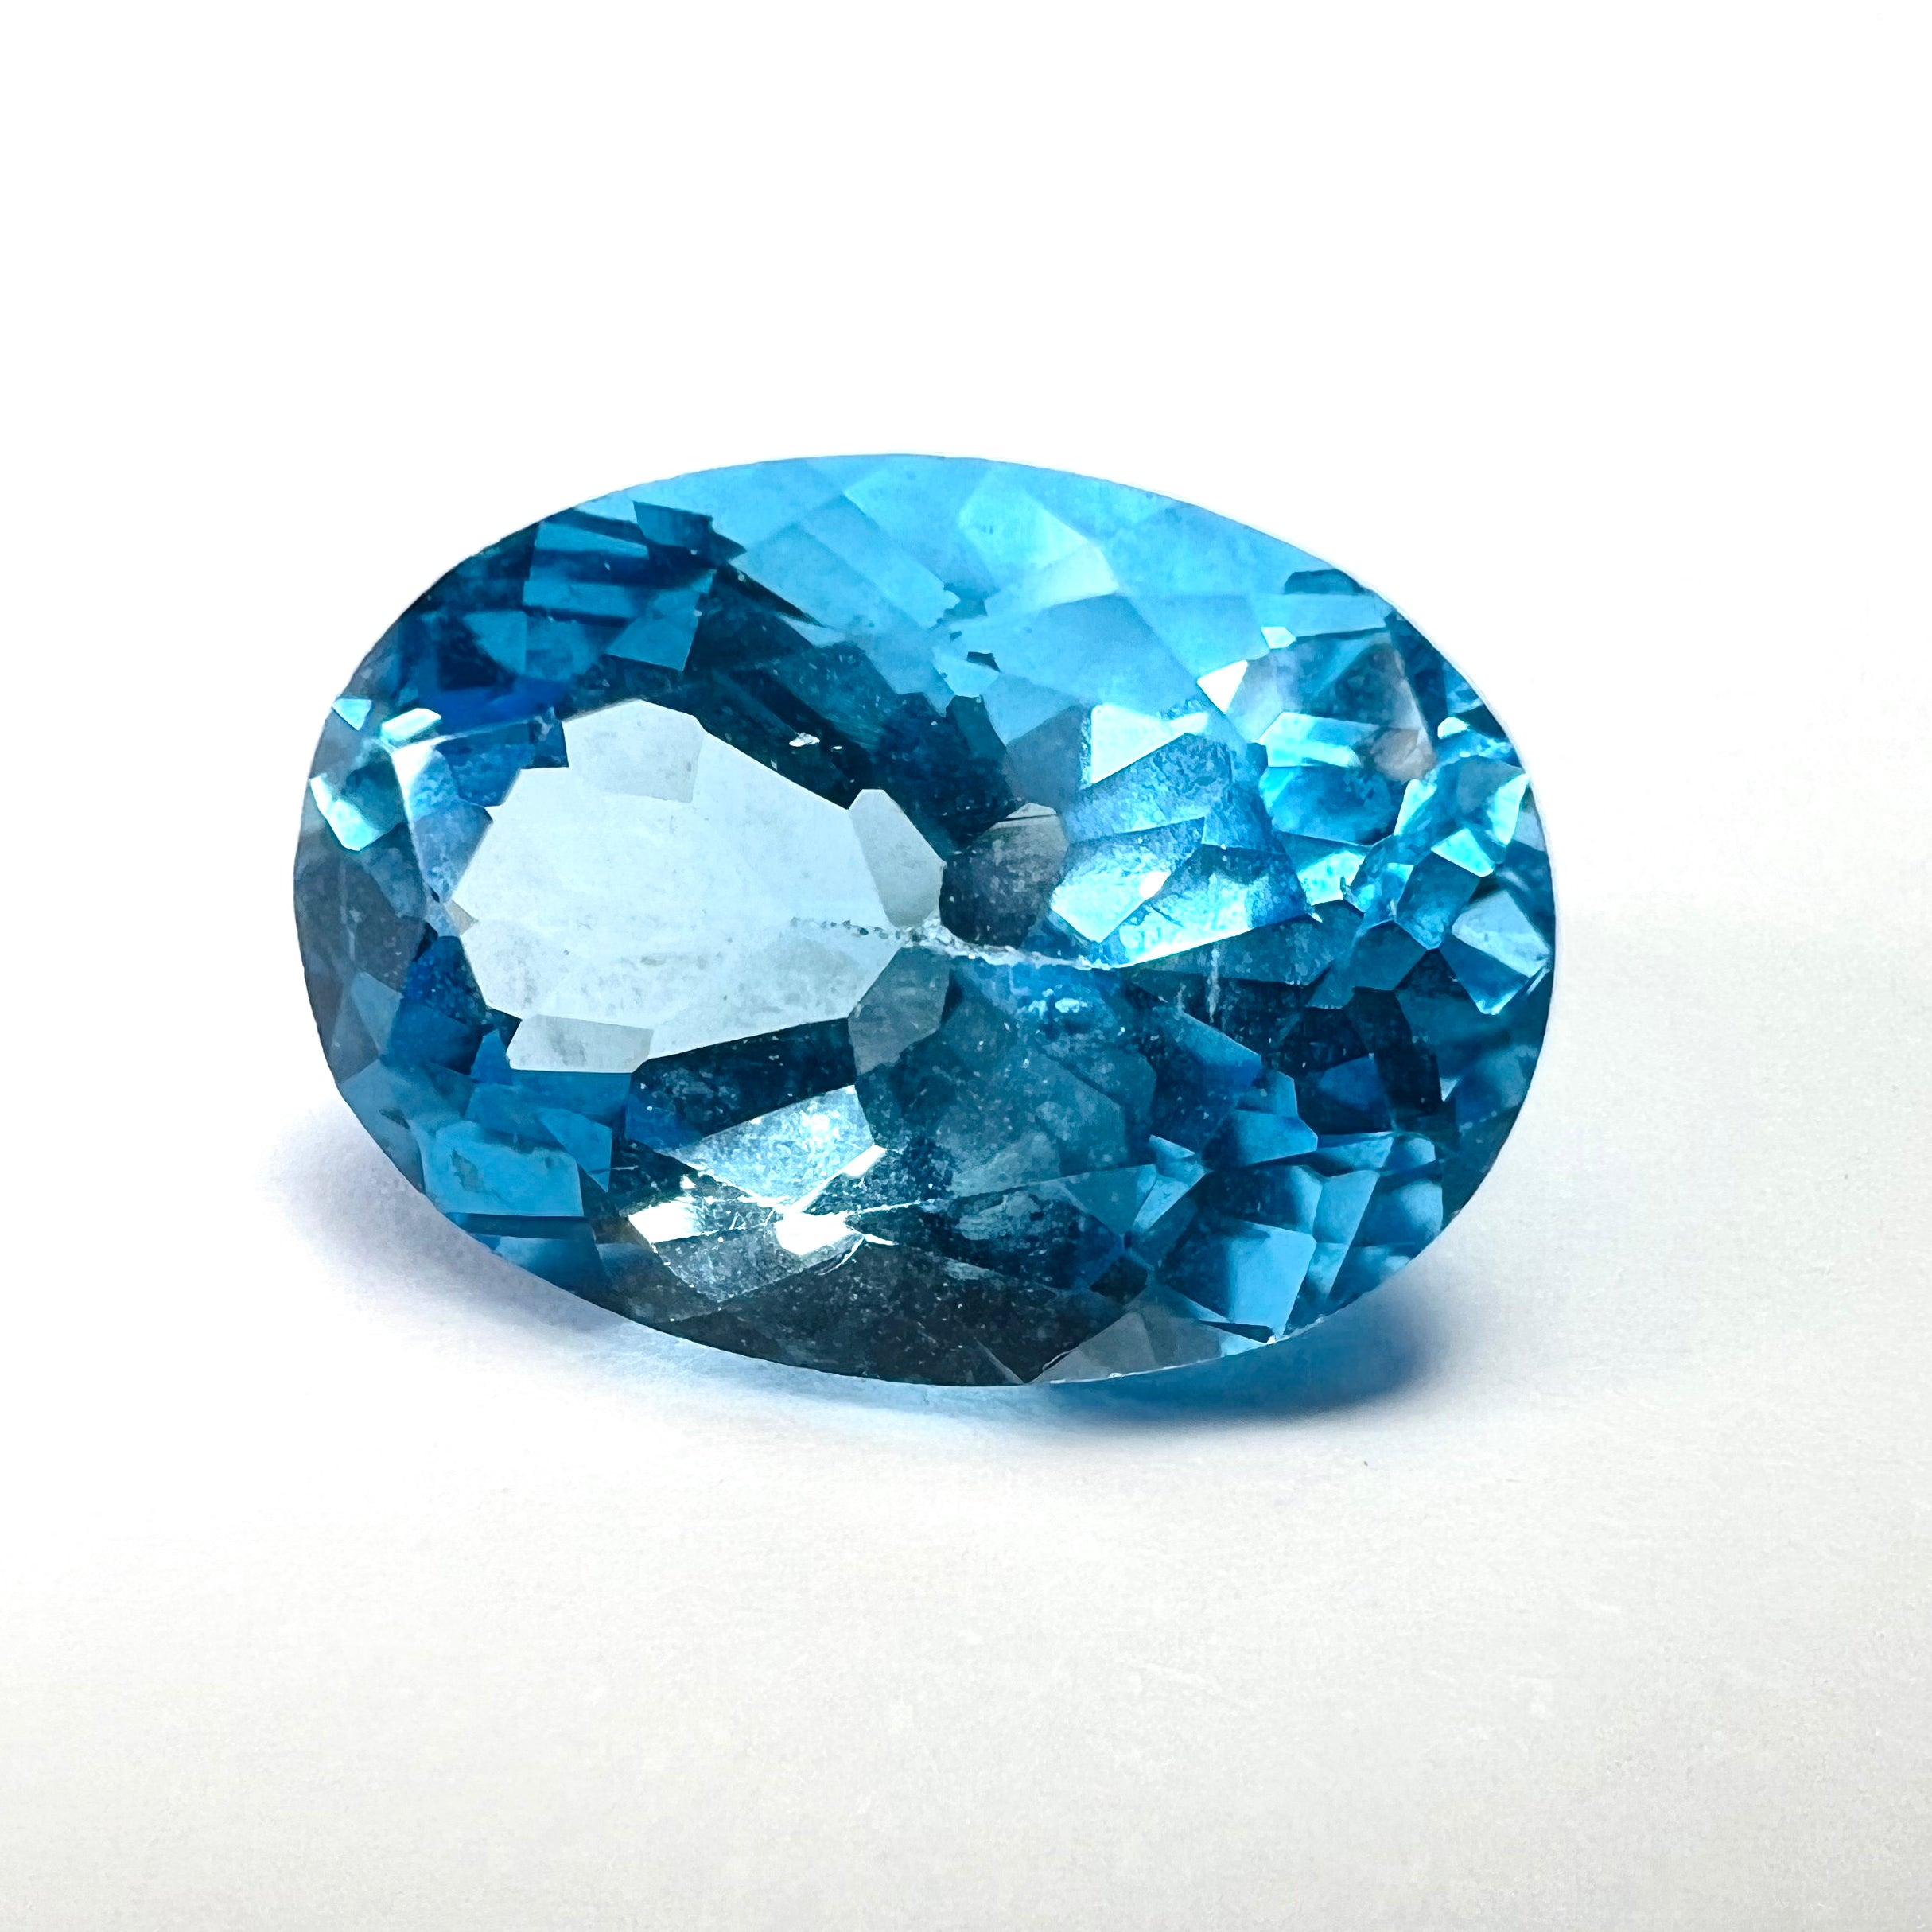 7.71CTW Loose Natural Oval Cut Topaz 14x10x7.4mm Earth mined Gemstone